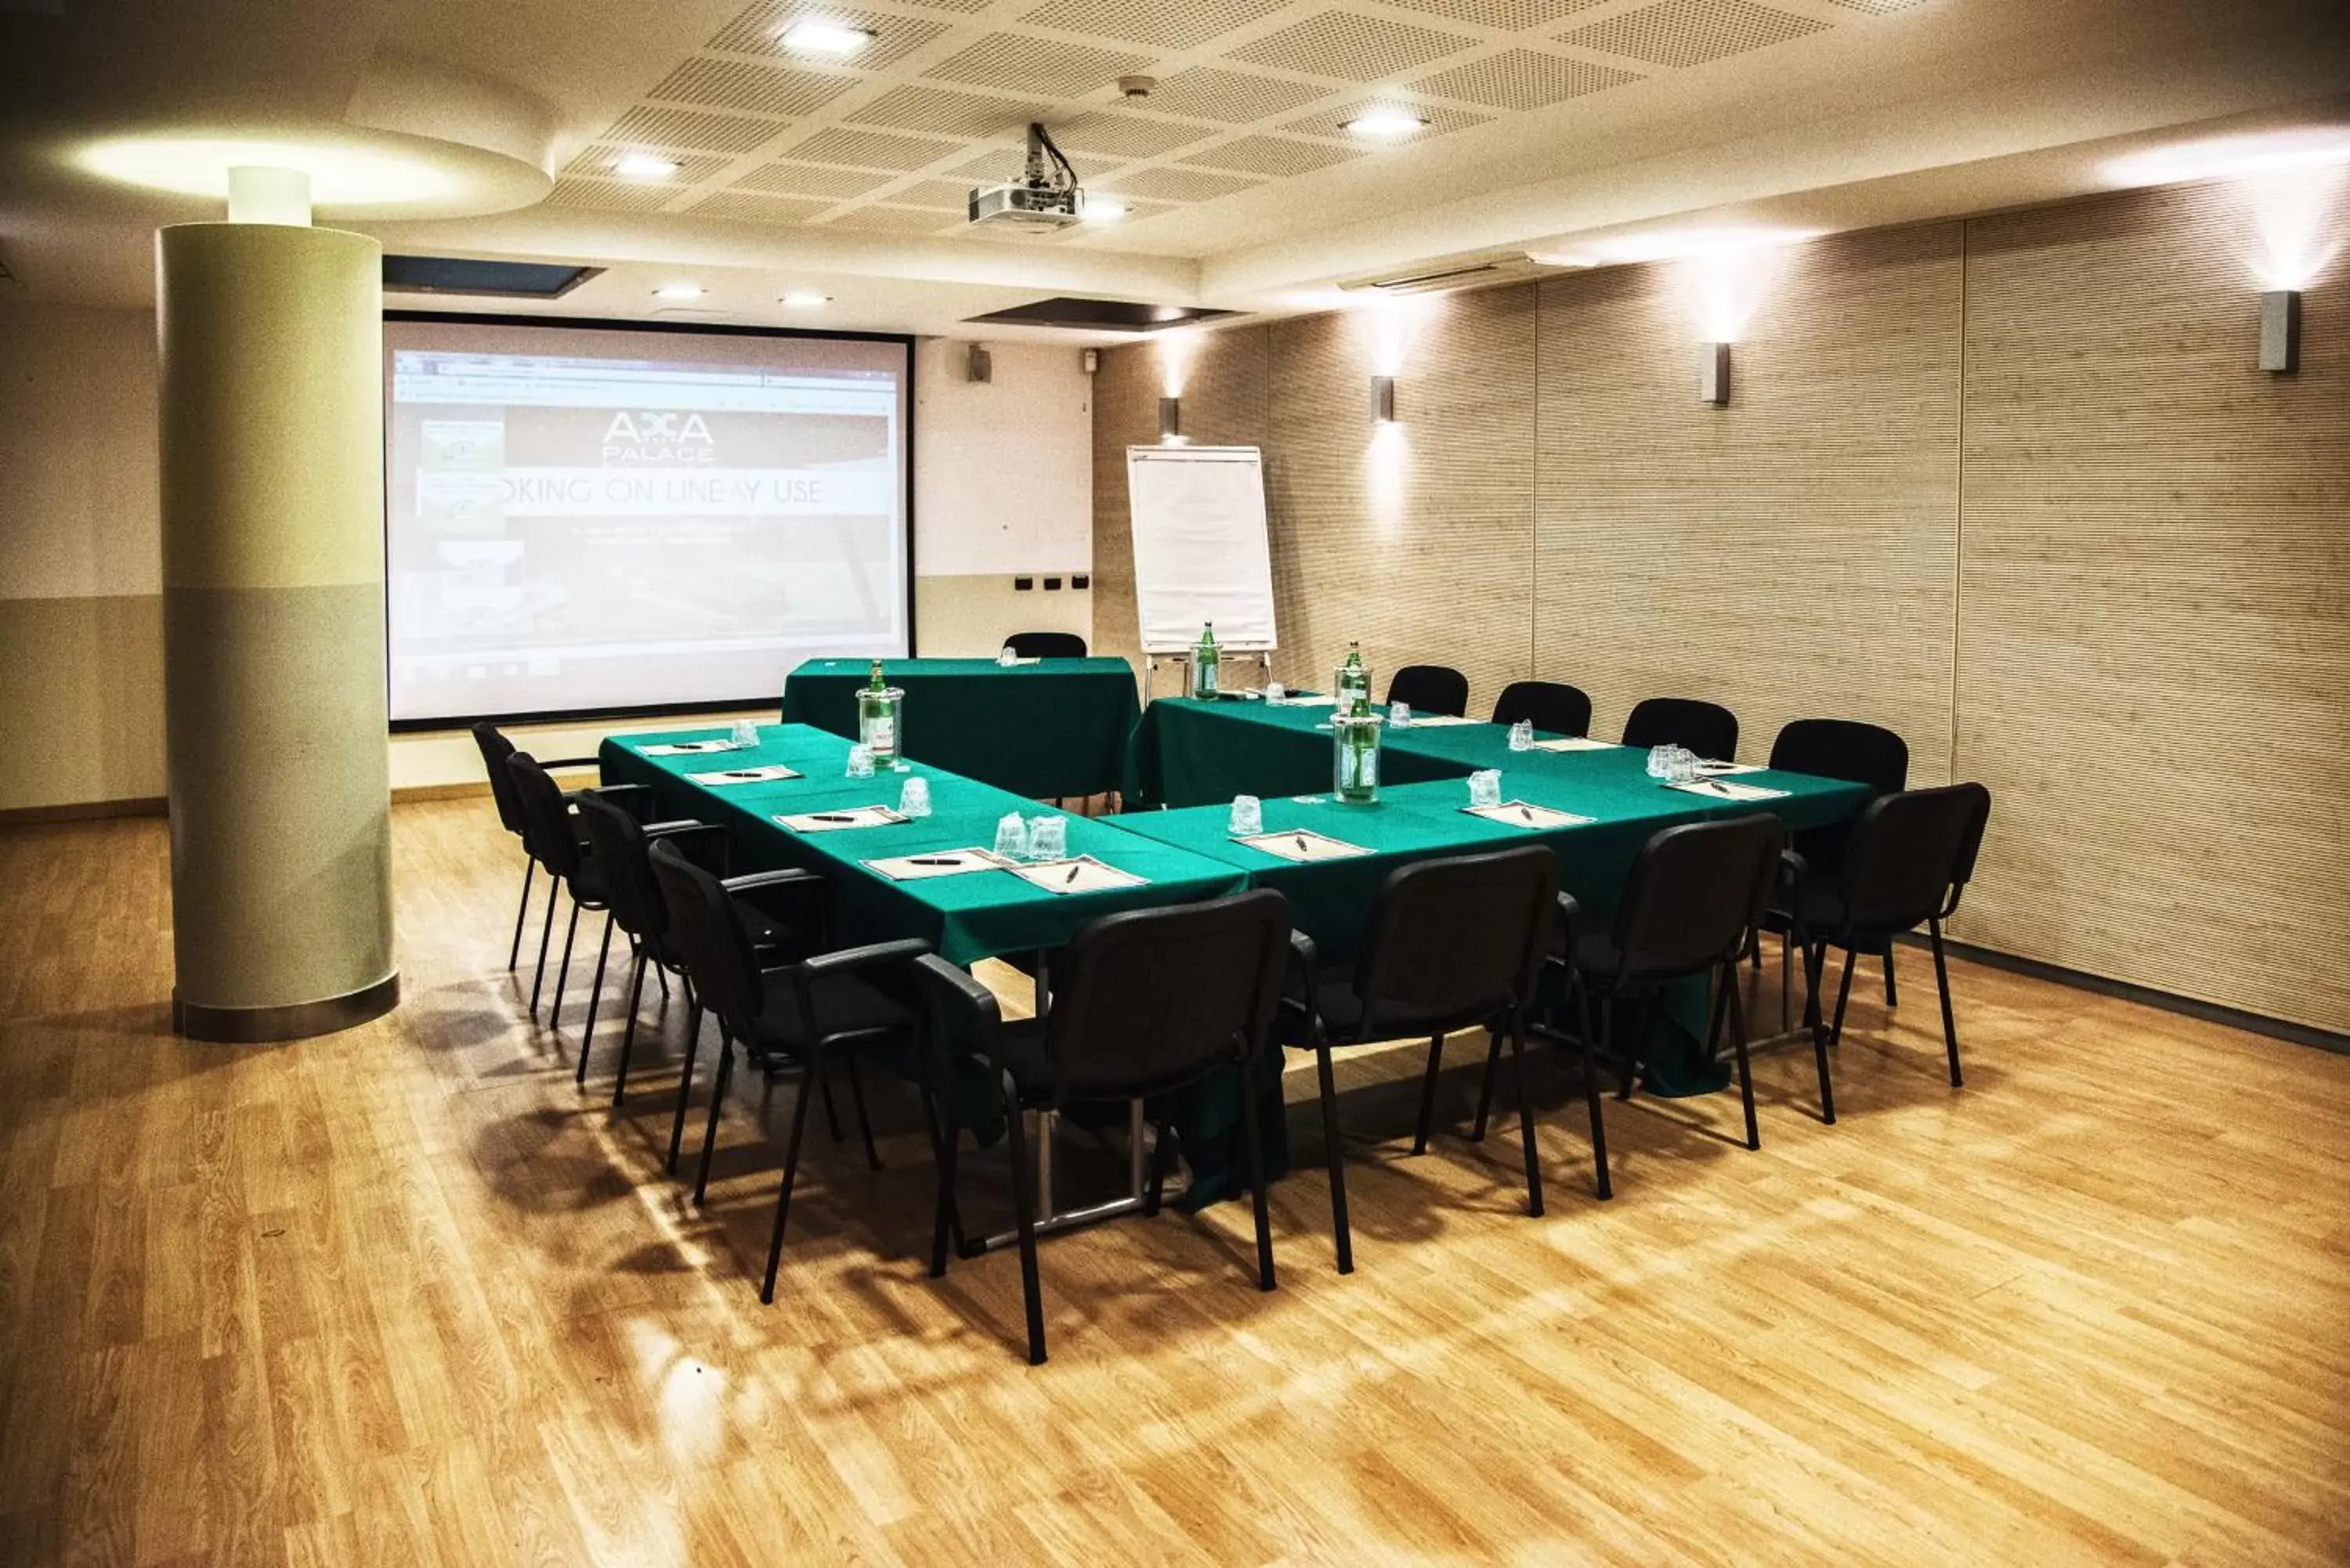 Meeting/conference room in Acca Palace AA Hotels